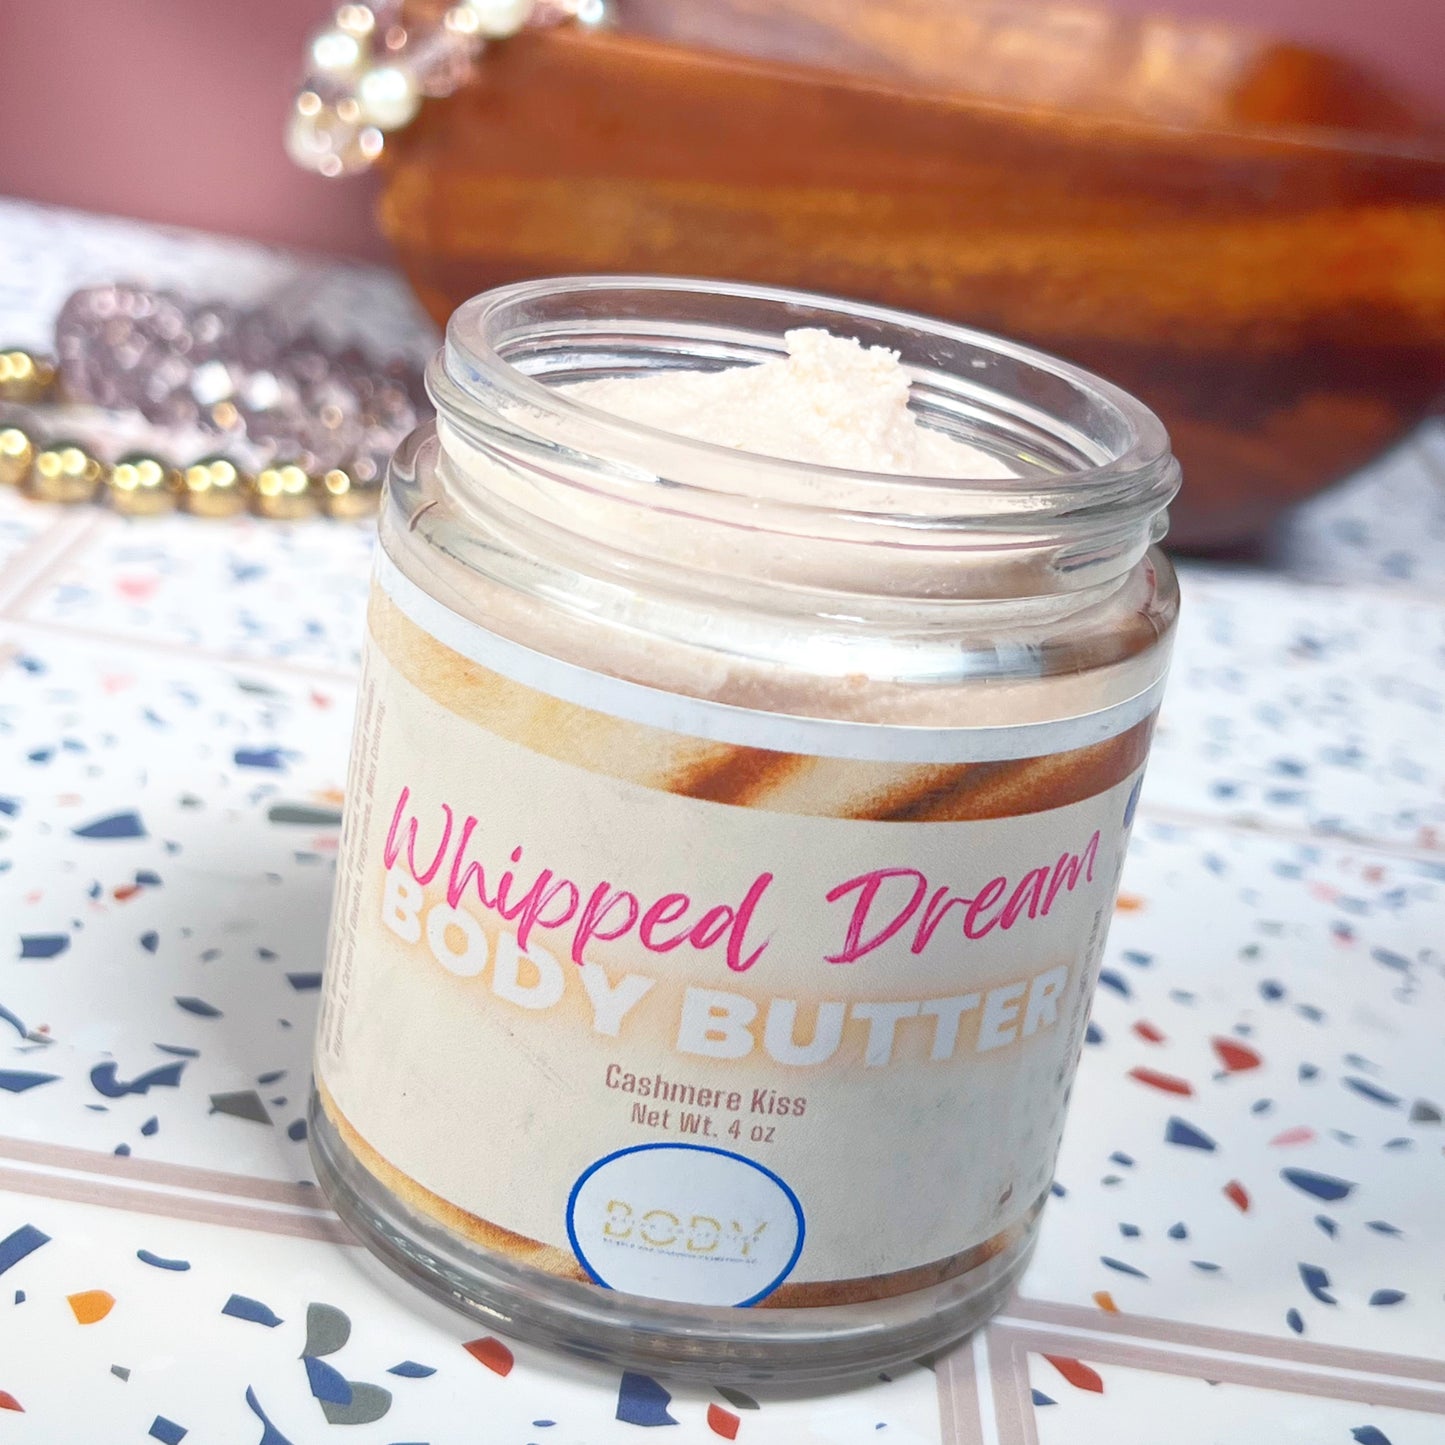 Whipped Dream Whipped Body Butter "Cashmere Kiss"